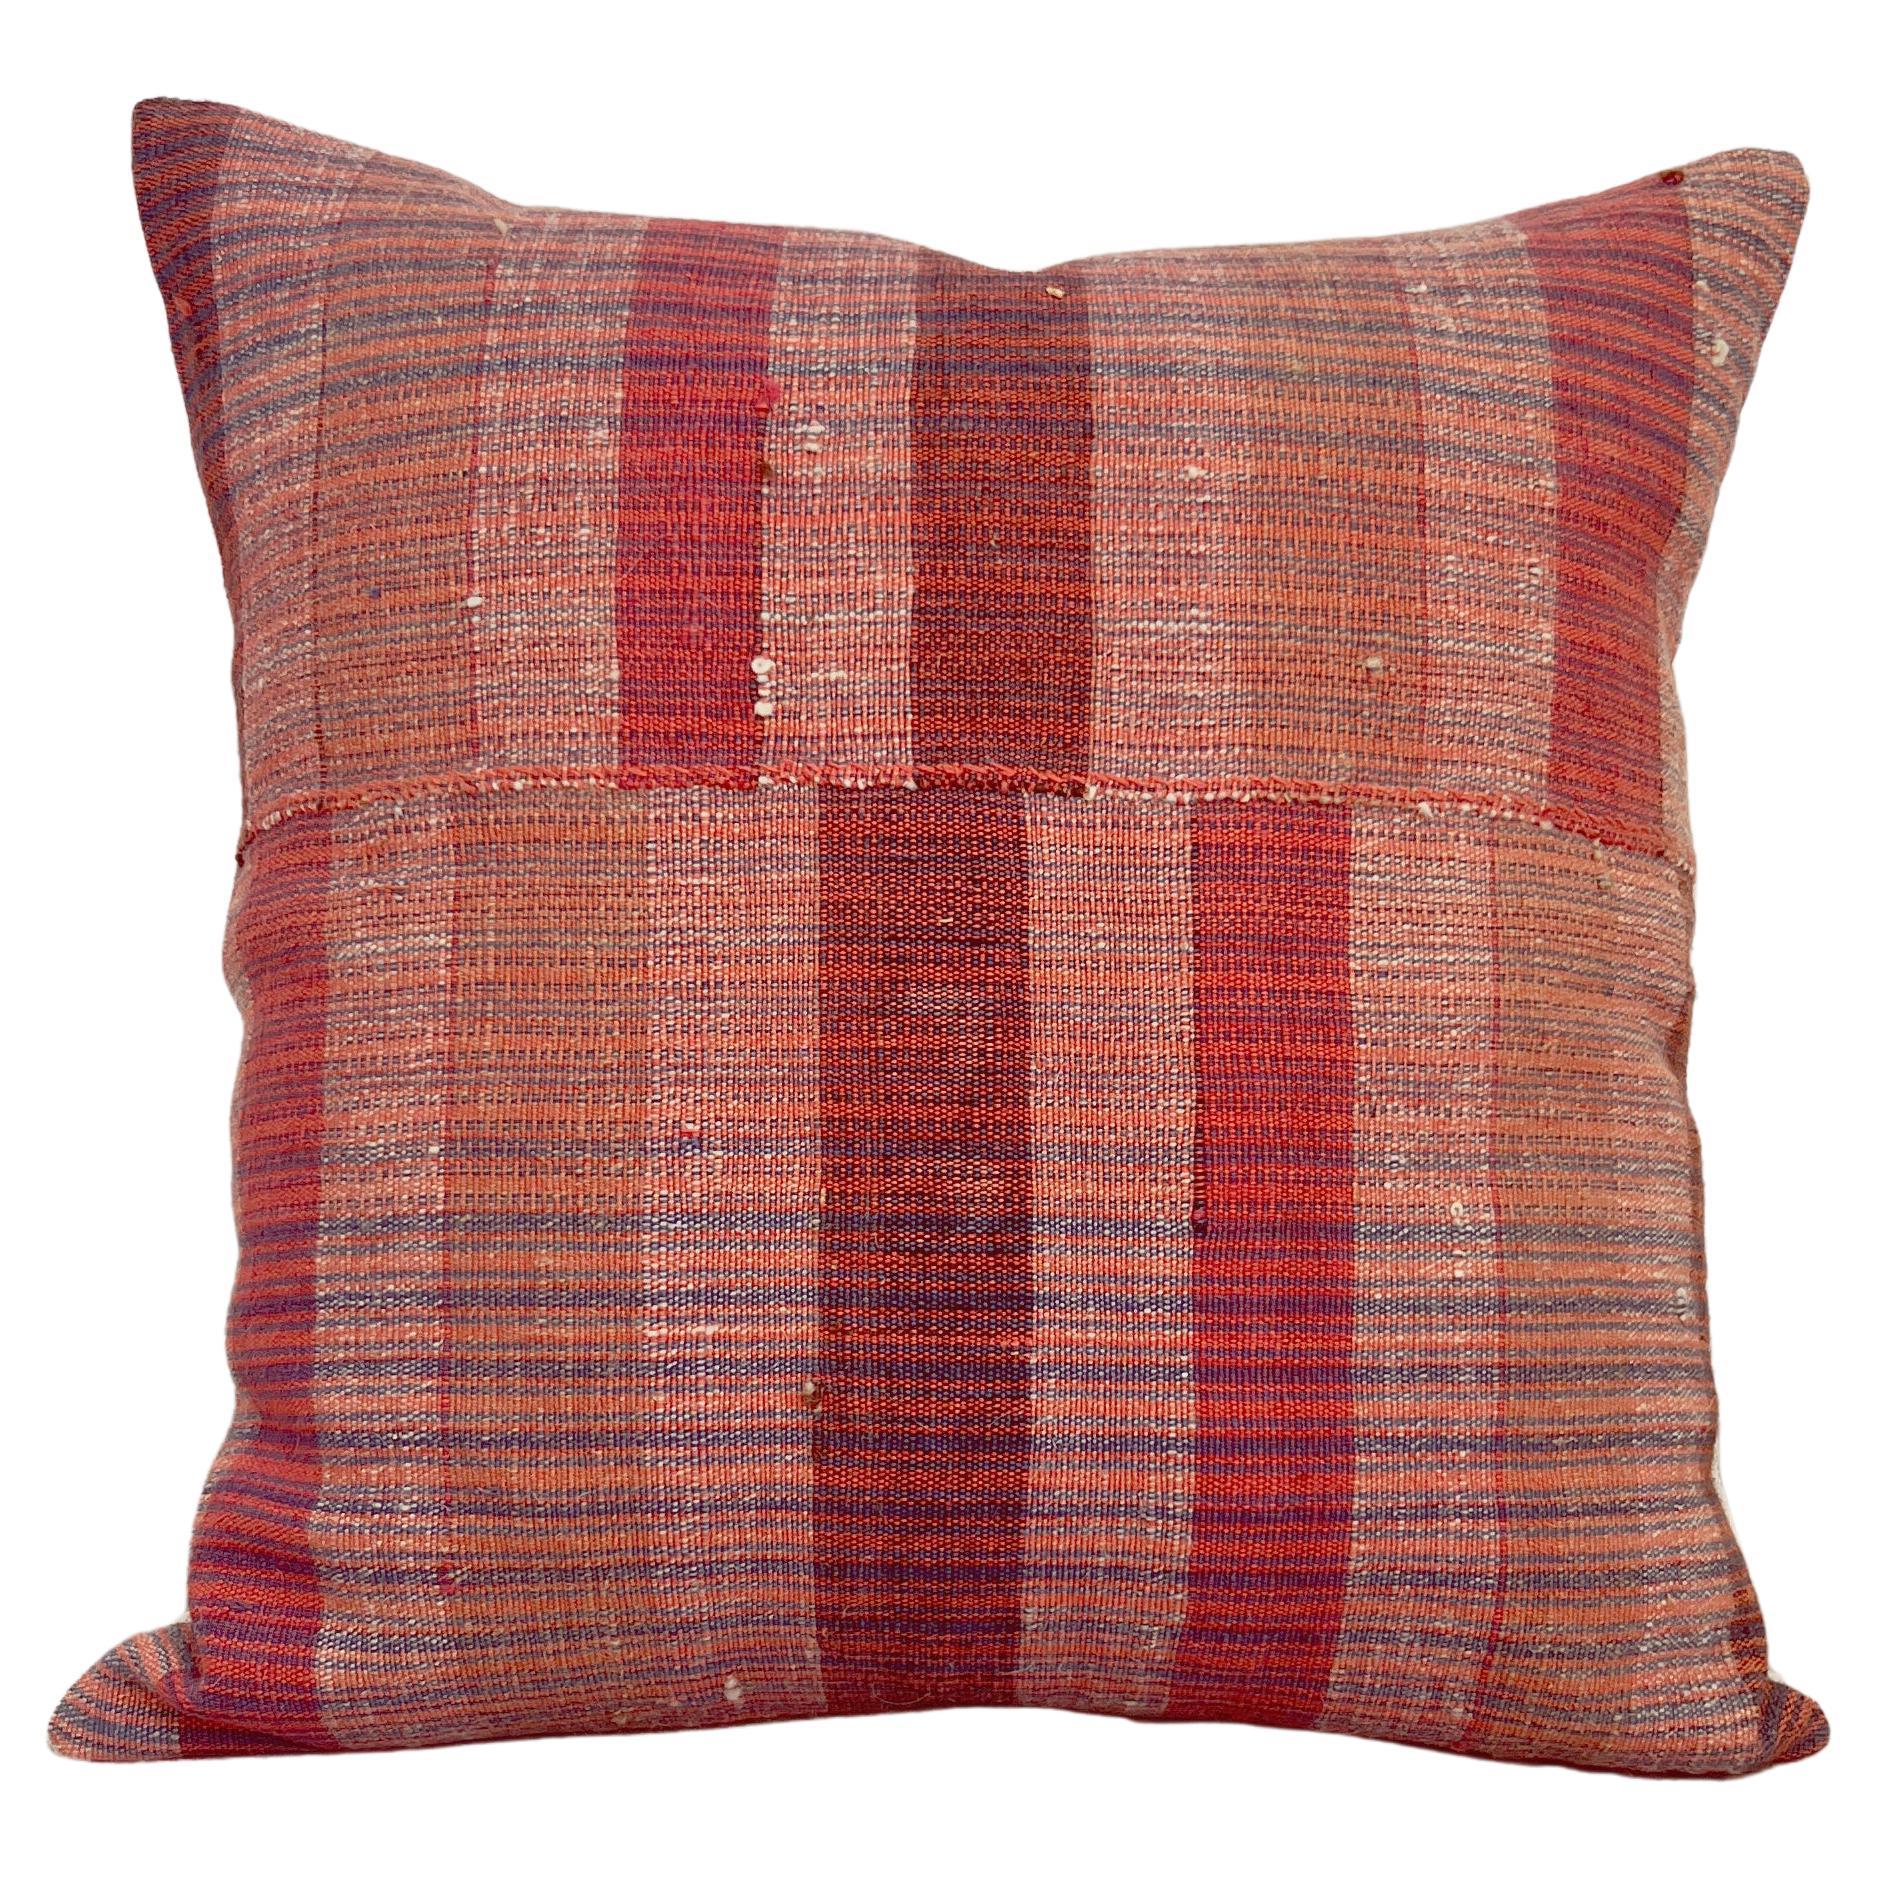 Matilde Red Striped Checkered Lumbar Throw Pillow made from Vintage Linen For Sale